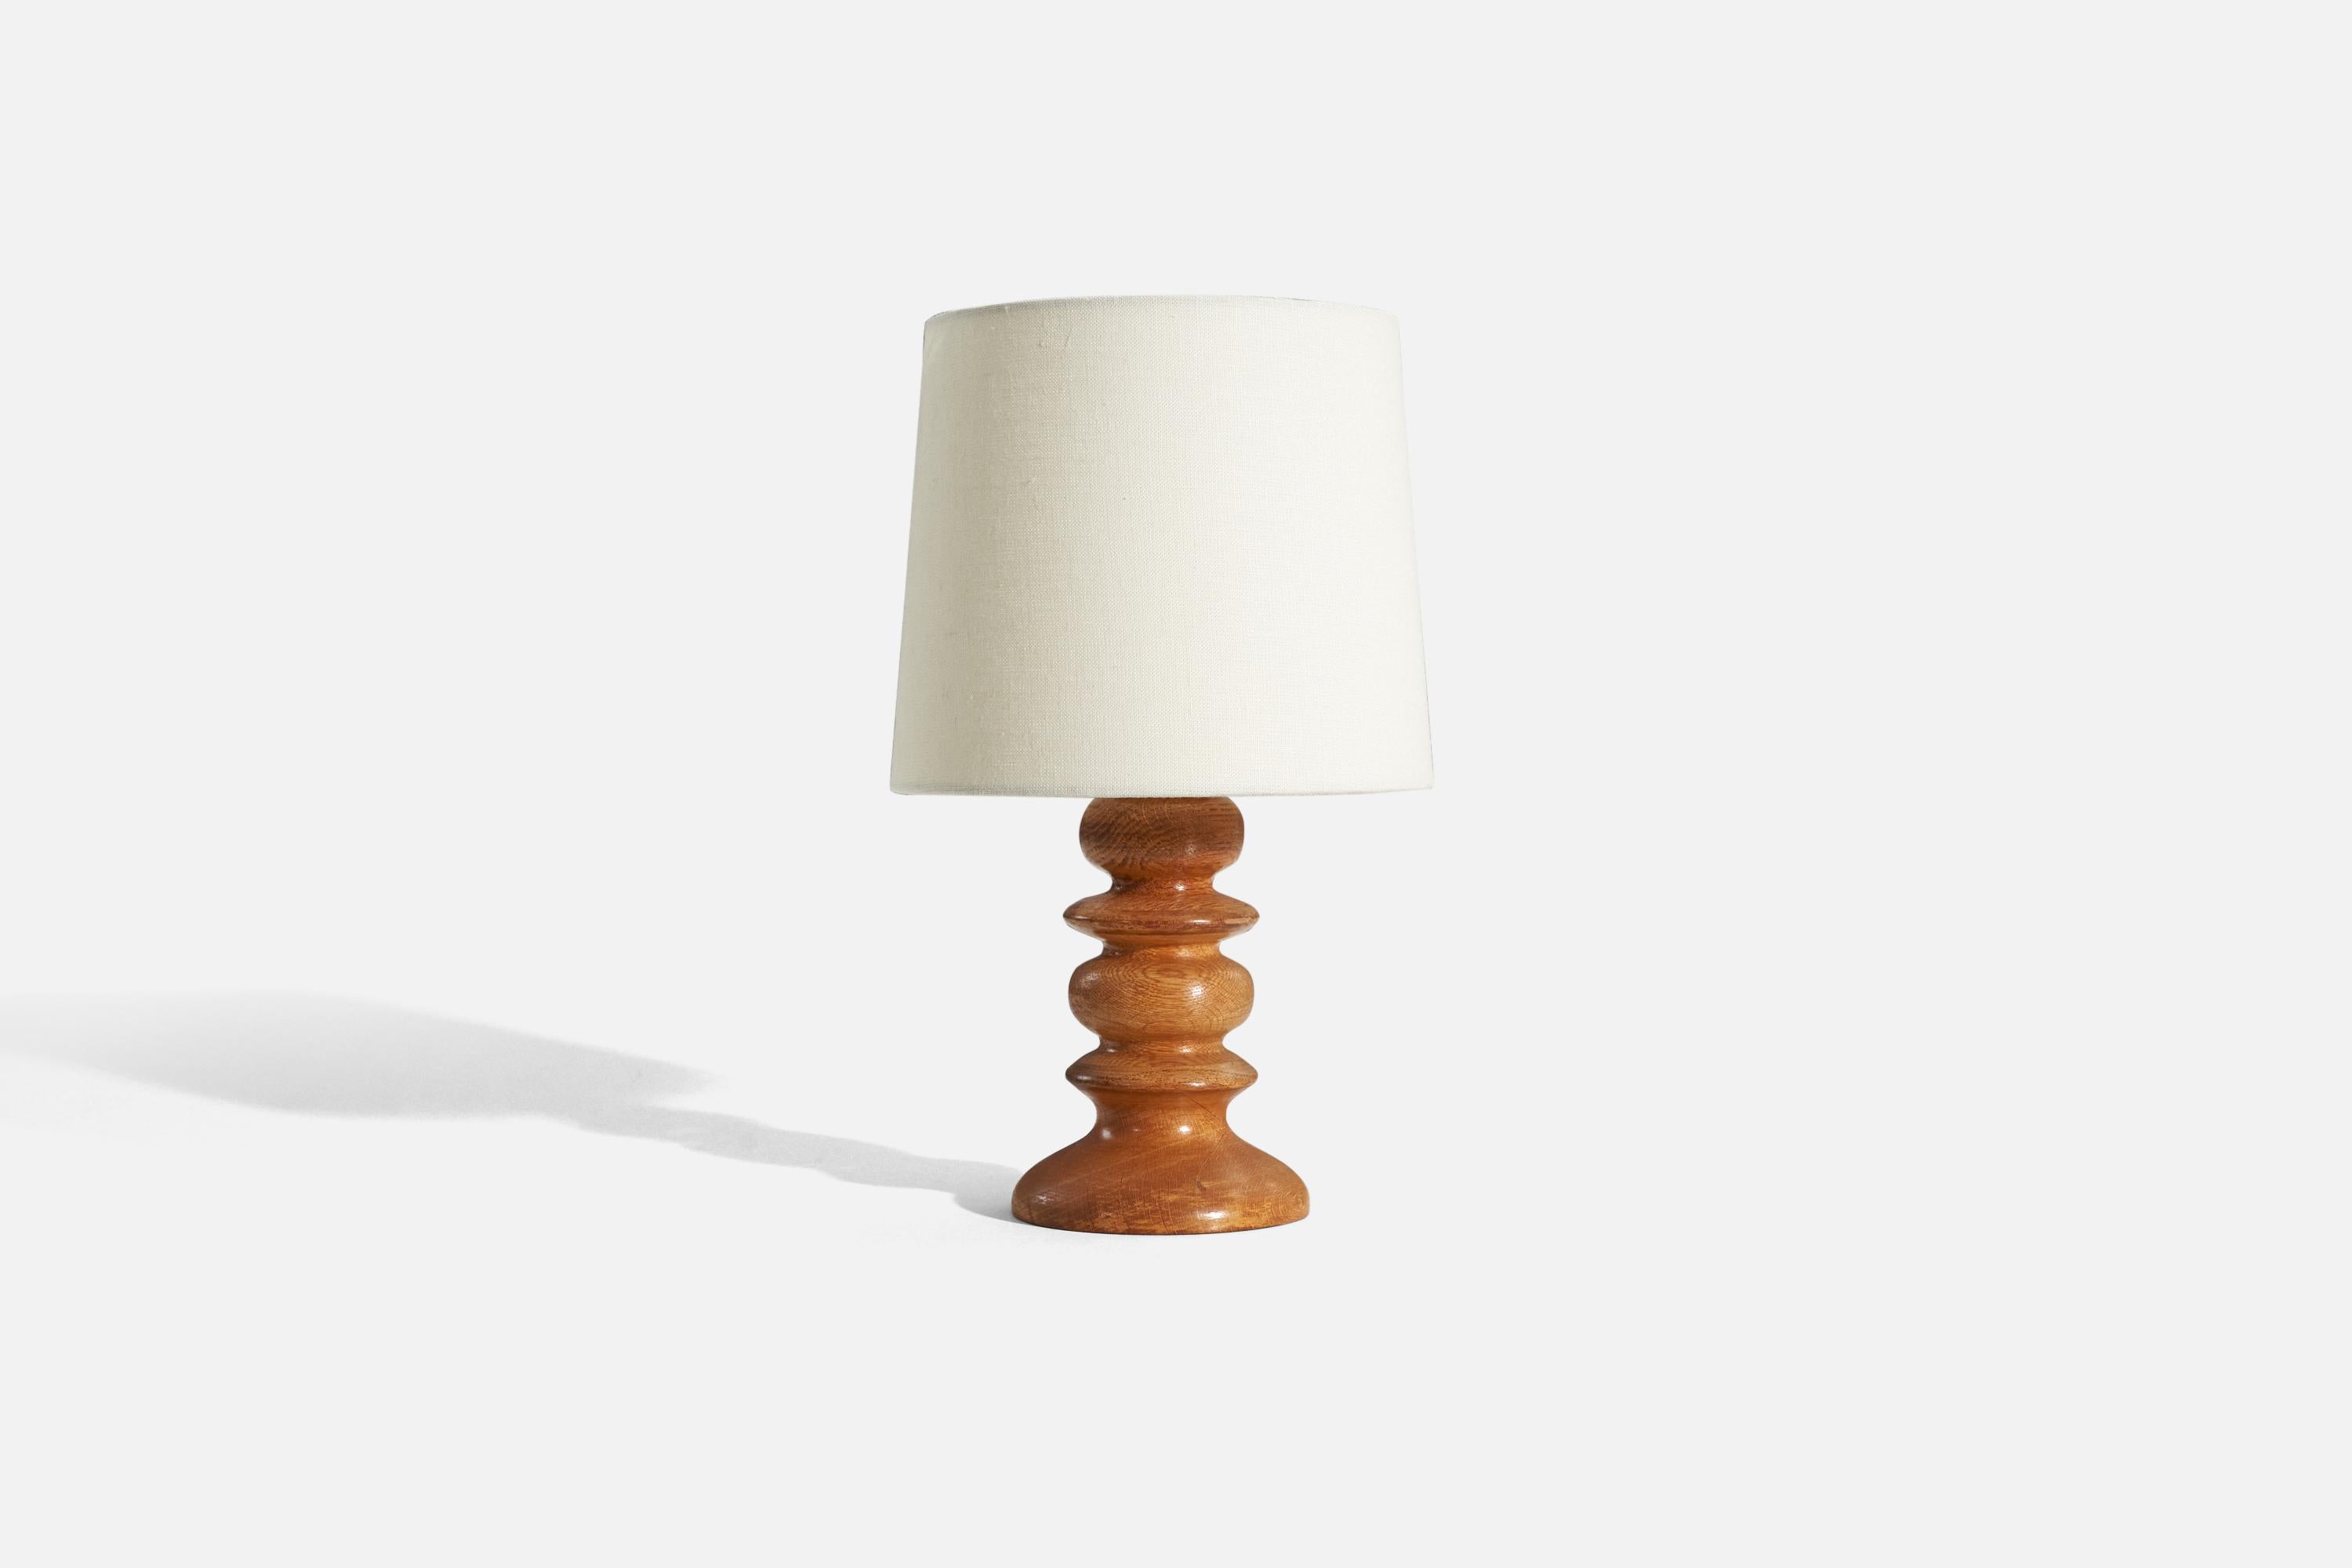 An oak table lamp designed and produced in Sweden, c. 1970s.

Sold without lampshade. 
Dimensions of Lamp (inches) : 9.25 x 4.5 x 4.5 (H x W x D)
Dimensions of Shade (inches) : 7 x 8 x 7 (T x B x H)
Dimension of Lamp with Shade (inches) : 13.4375 x